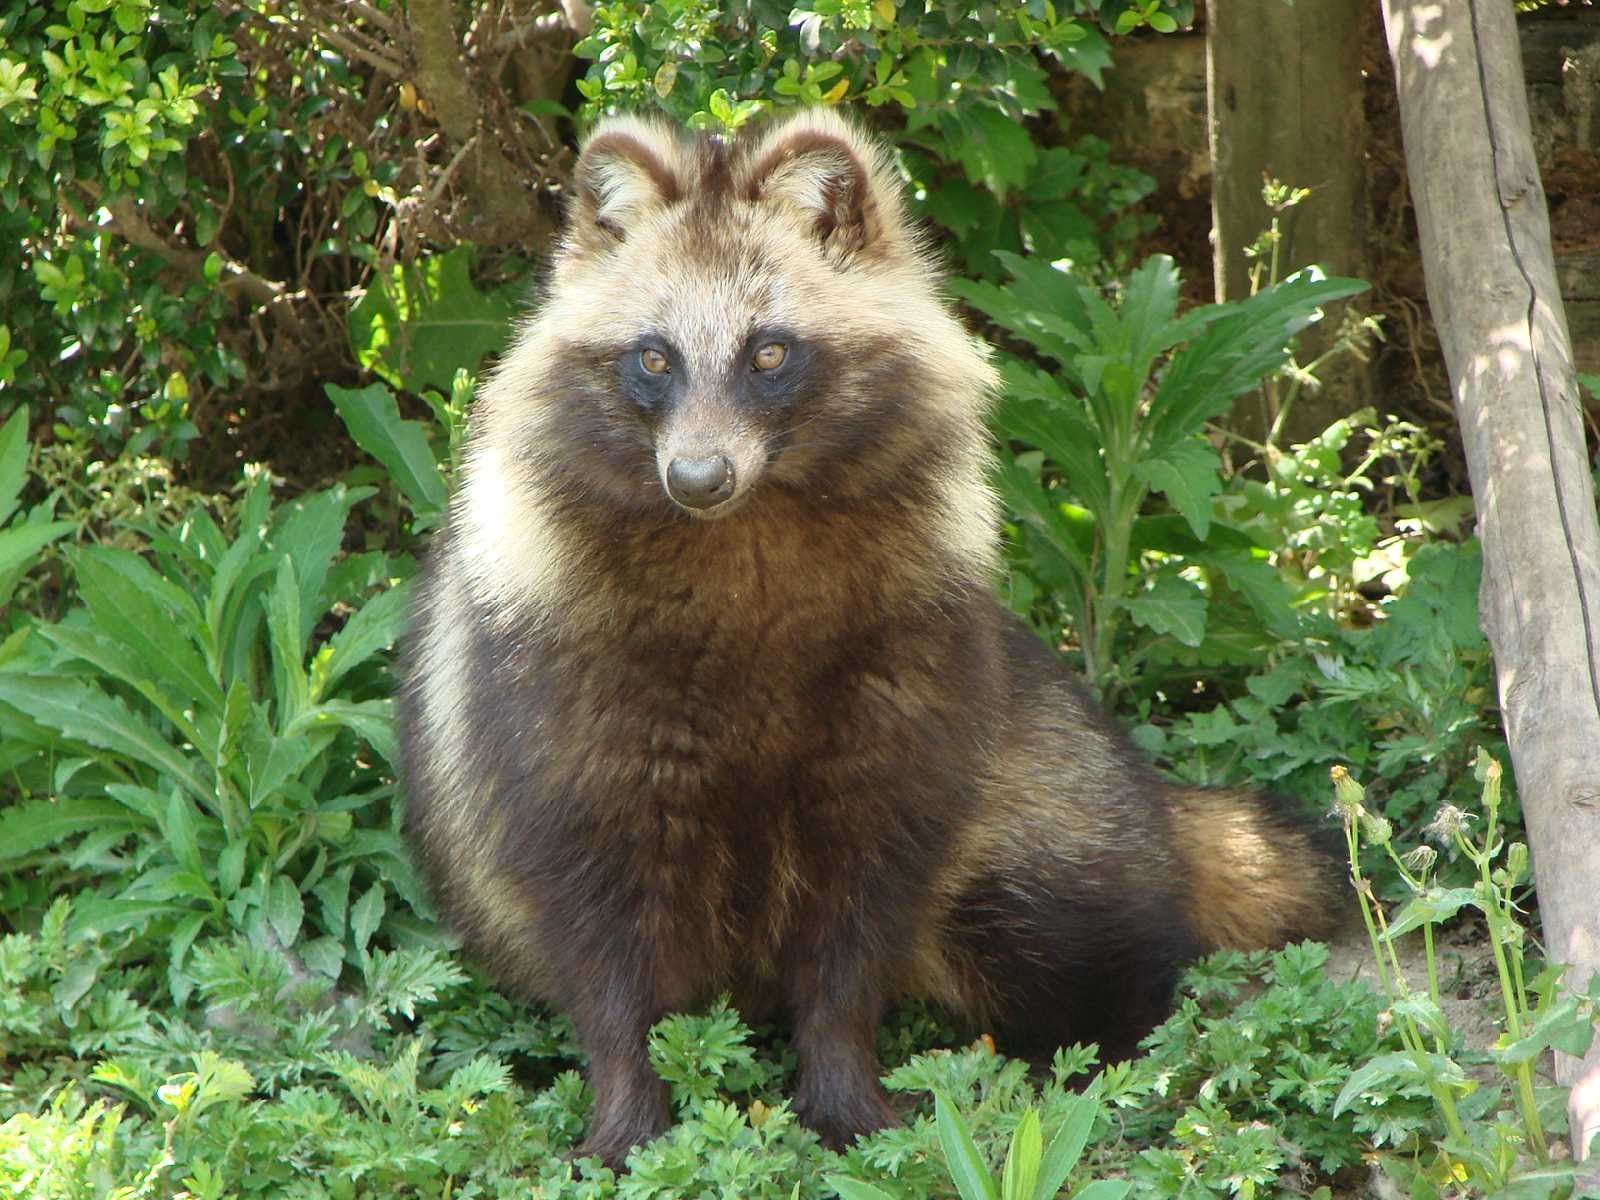 Primary inspiration for a tanuki mask design. The ears are so much closer on this one compared to other tanuki image